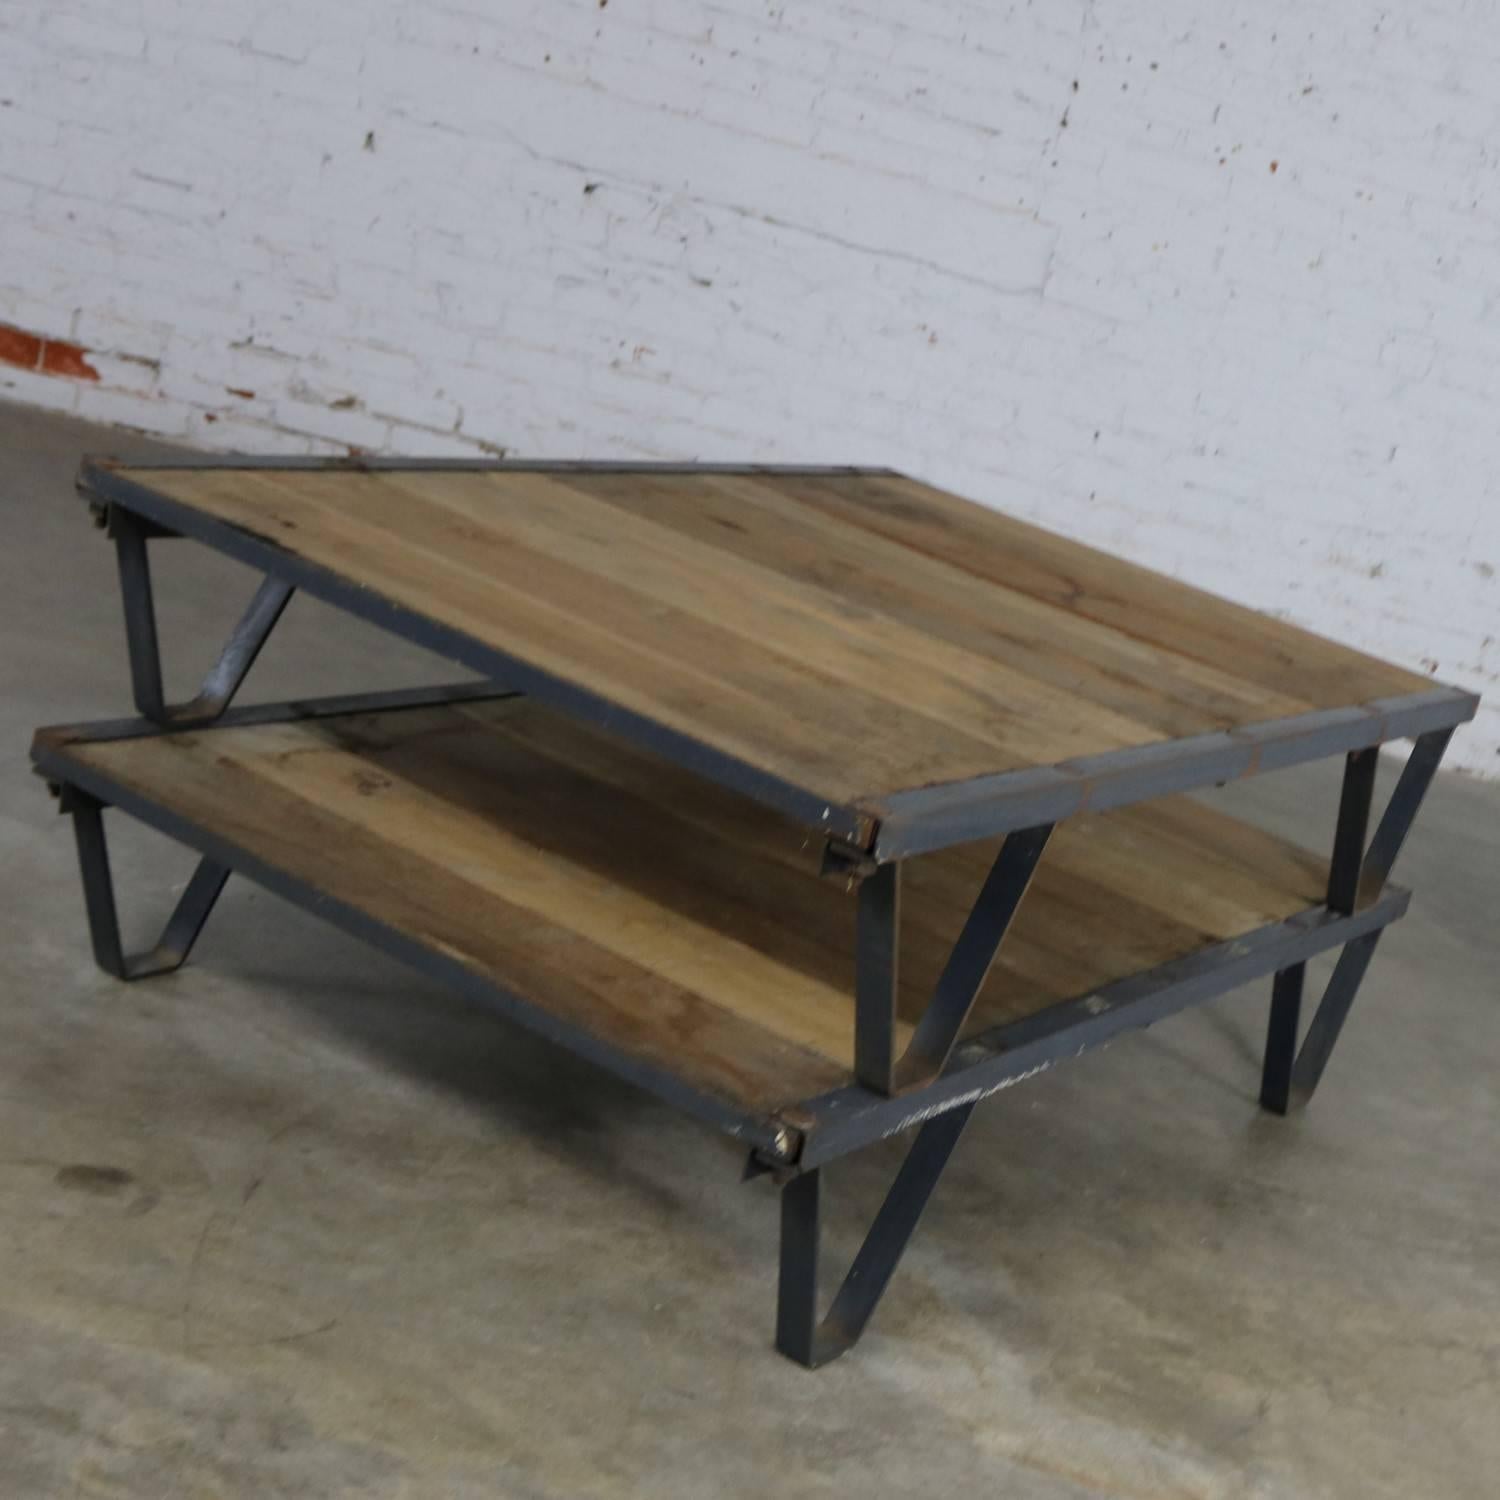 American Industrial Oak and Steel Pallet Coffee Table For Sale at ...